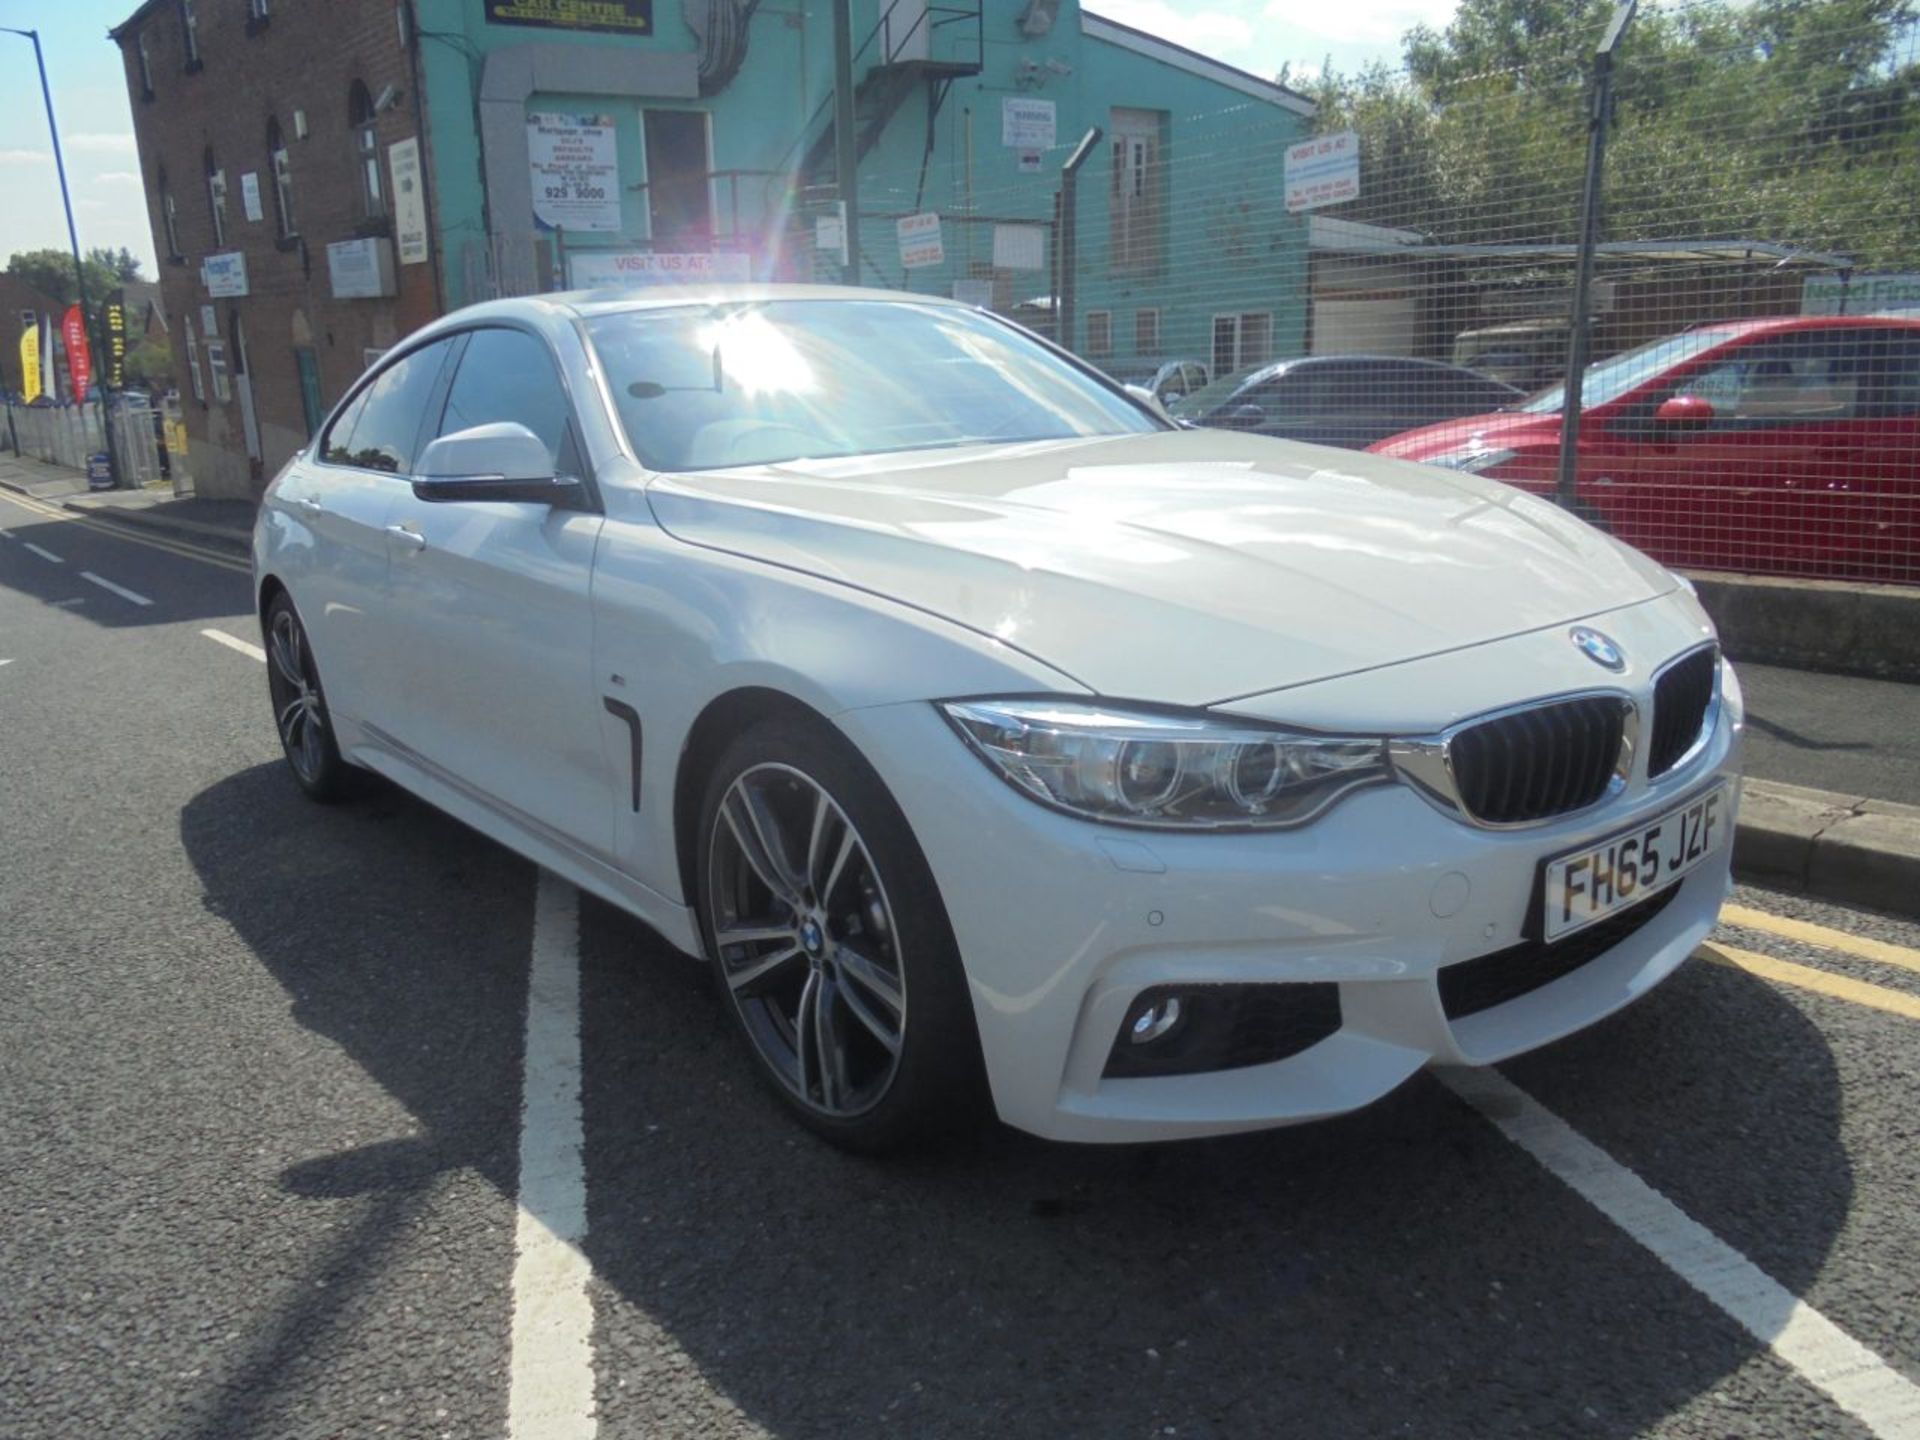 2015 (65 REG), BMW 4 SERIES GRAN COUPE 3.0 435I M SPORT GRAN COUPE AUTO 5DR COUPE, 1,200 MILES ONLY - Image 11 of 11